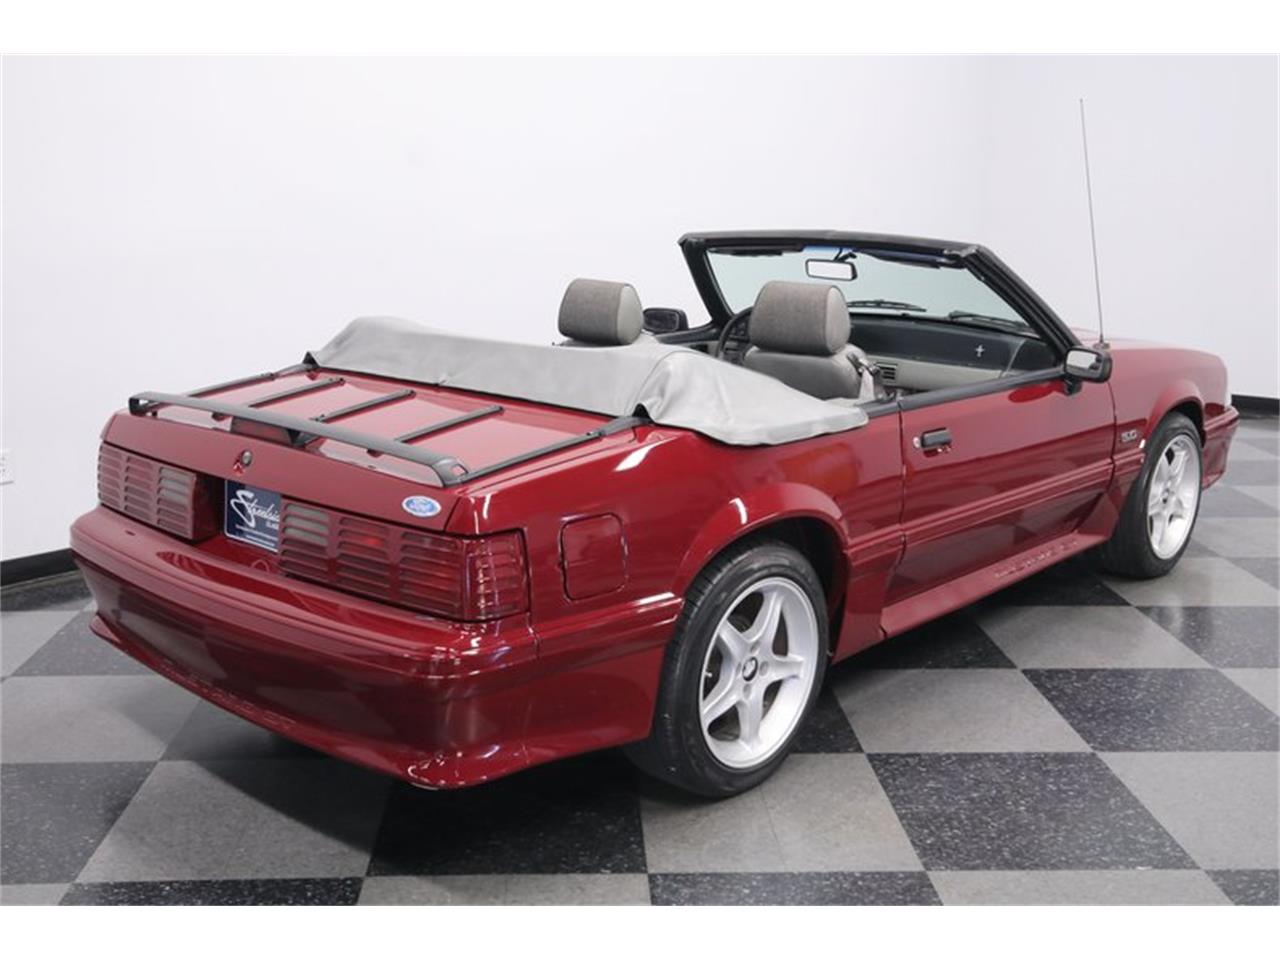 1989 Ford Mustang Gt Price